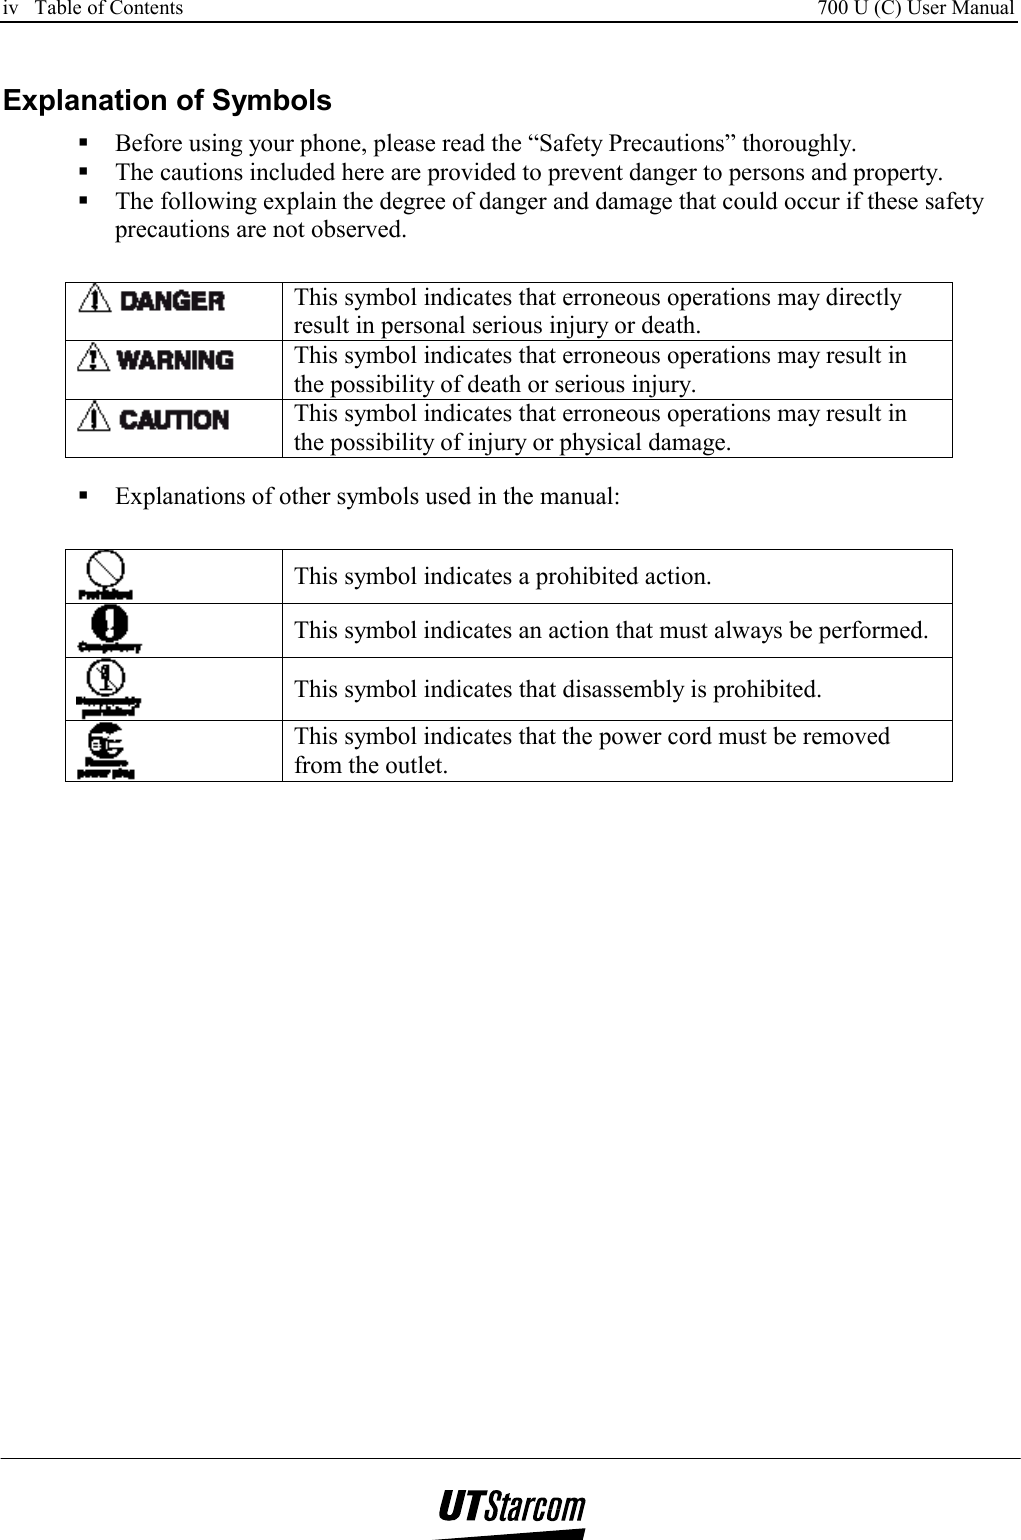 iv   Table of Contents     700 U (C) User Manual      Explanation of Symbols  Before using your phone, please read the “Safety Precautions” thoroughly.  The cautions included here are provided to prevent danger to persons and property.  The following explain the degree of danger and damage that could occur if these safety precautions are not observed.   This symbol indicates that erroneous operations may directly result in personal serious injury or death.  This symbol indicates that erroneous operations may result in the possibility of death or serious injury.  This symbol indicates that erroneous operations may result in the possibility of injury or physical damage.   Explanations of other symbols used in the manual:  This symbol indicates a prohibited action.  This symbol indicates an action that must always be performed.  This symbol indicates that disassembly is prohibited.  This symbol indicates that the power cord must be removed from the outlet.  